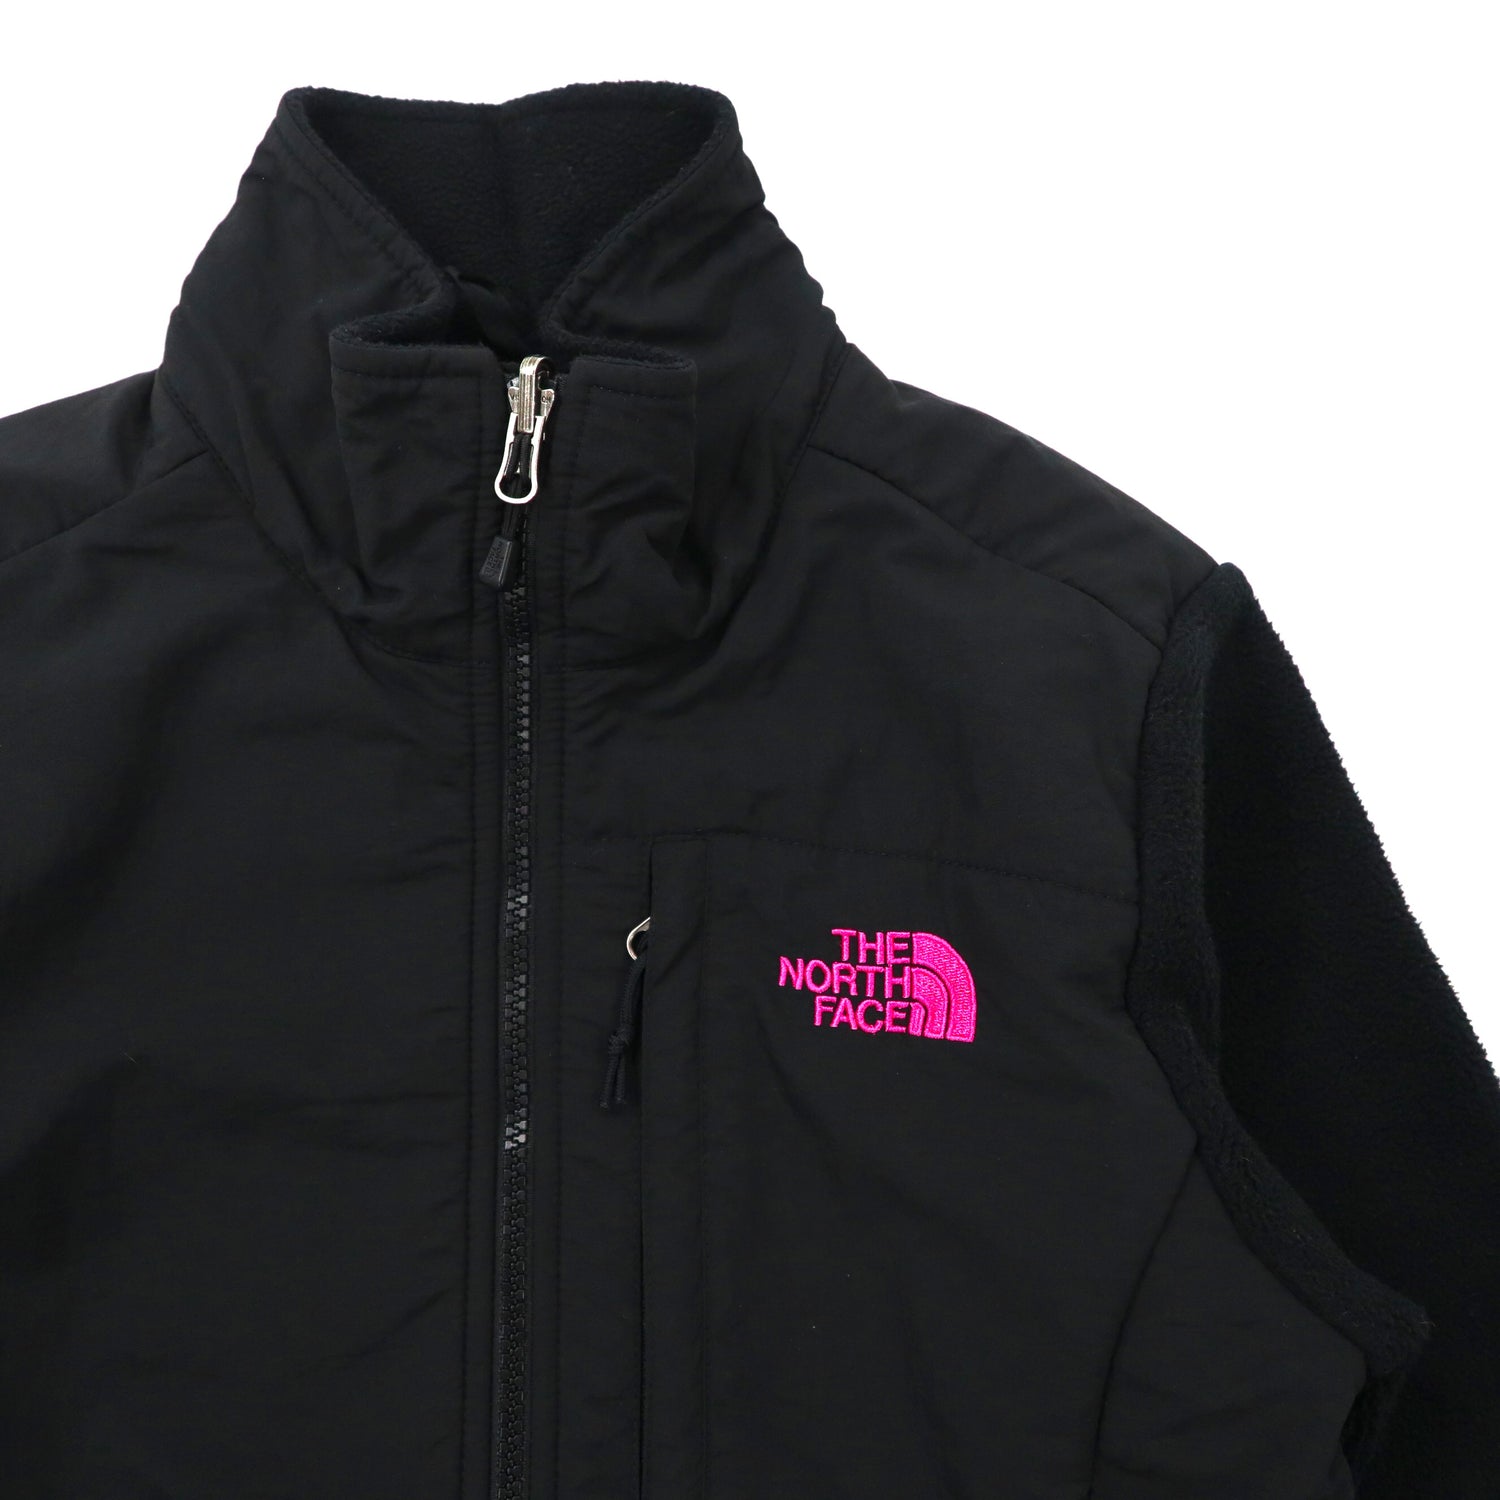 THE NORTH FACE デナリジャケット ナイロン切替フリース 